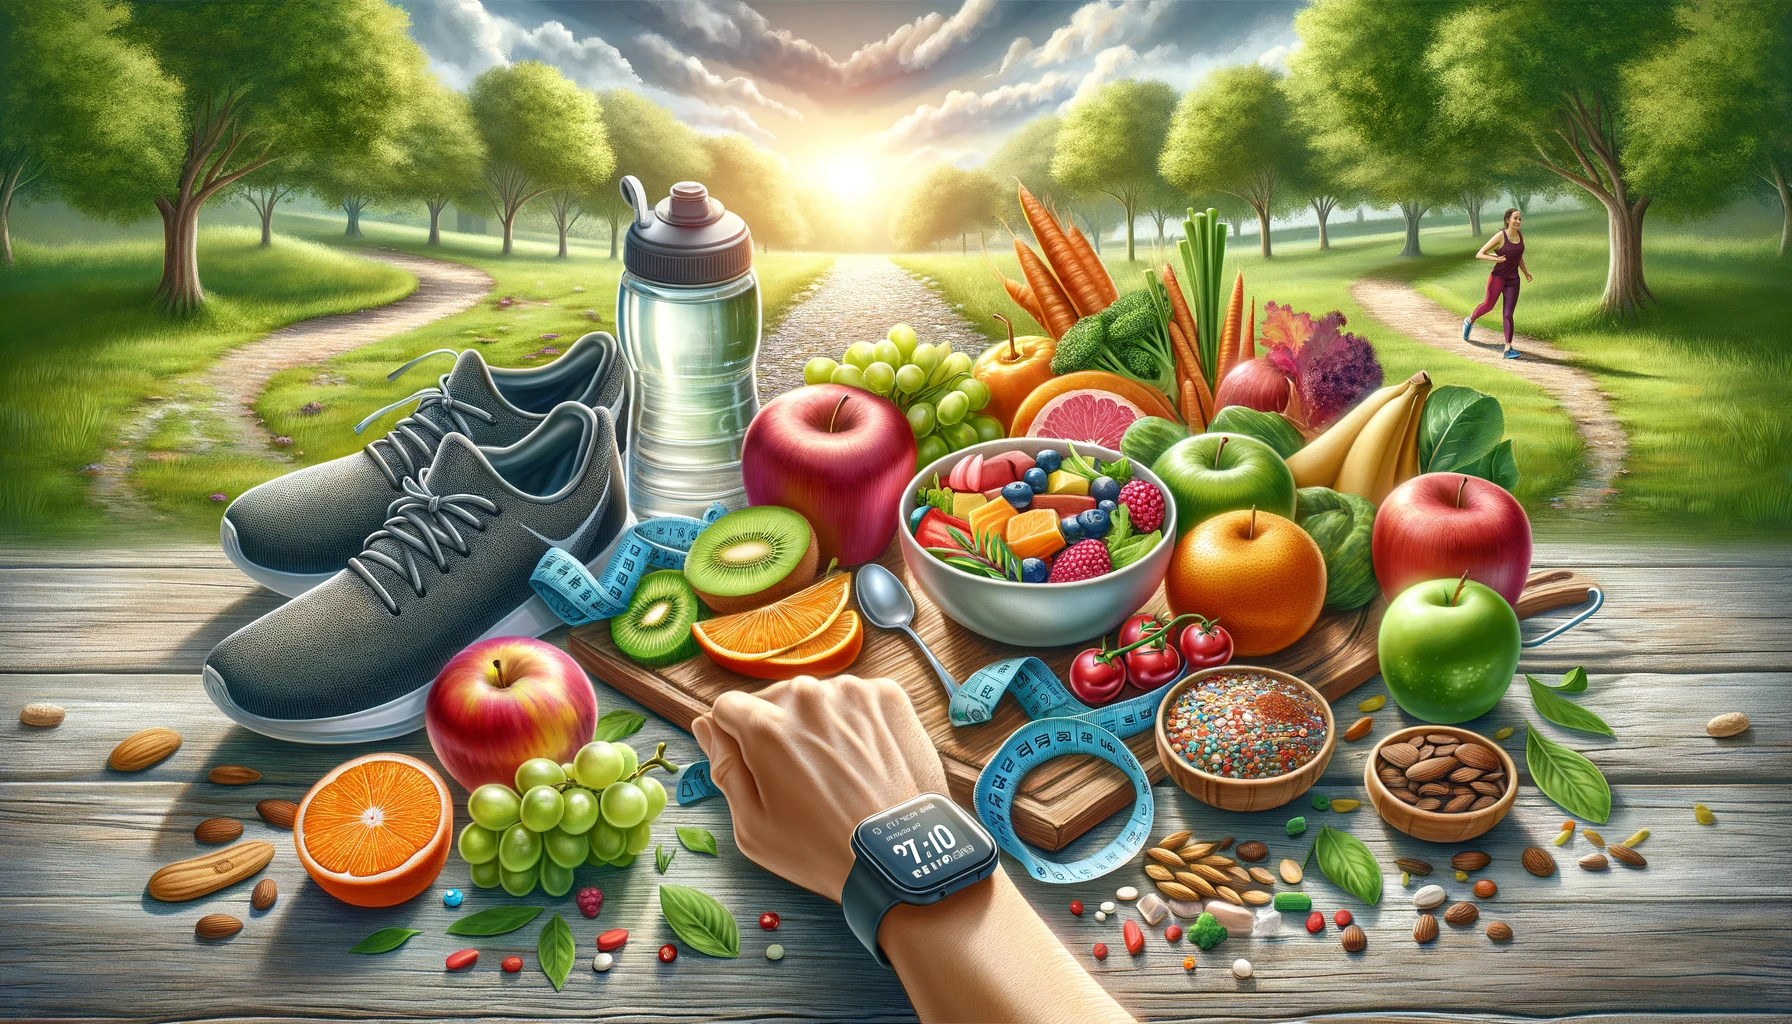 Sustainable weight loss concept image from Healthy Life - New Start featuring balanced diet and exercise elements.